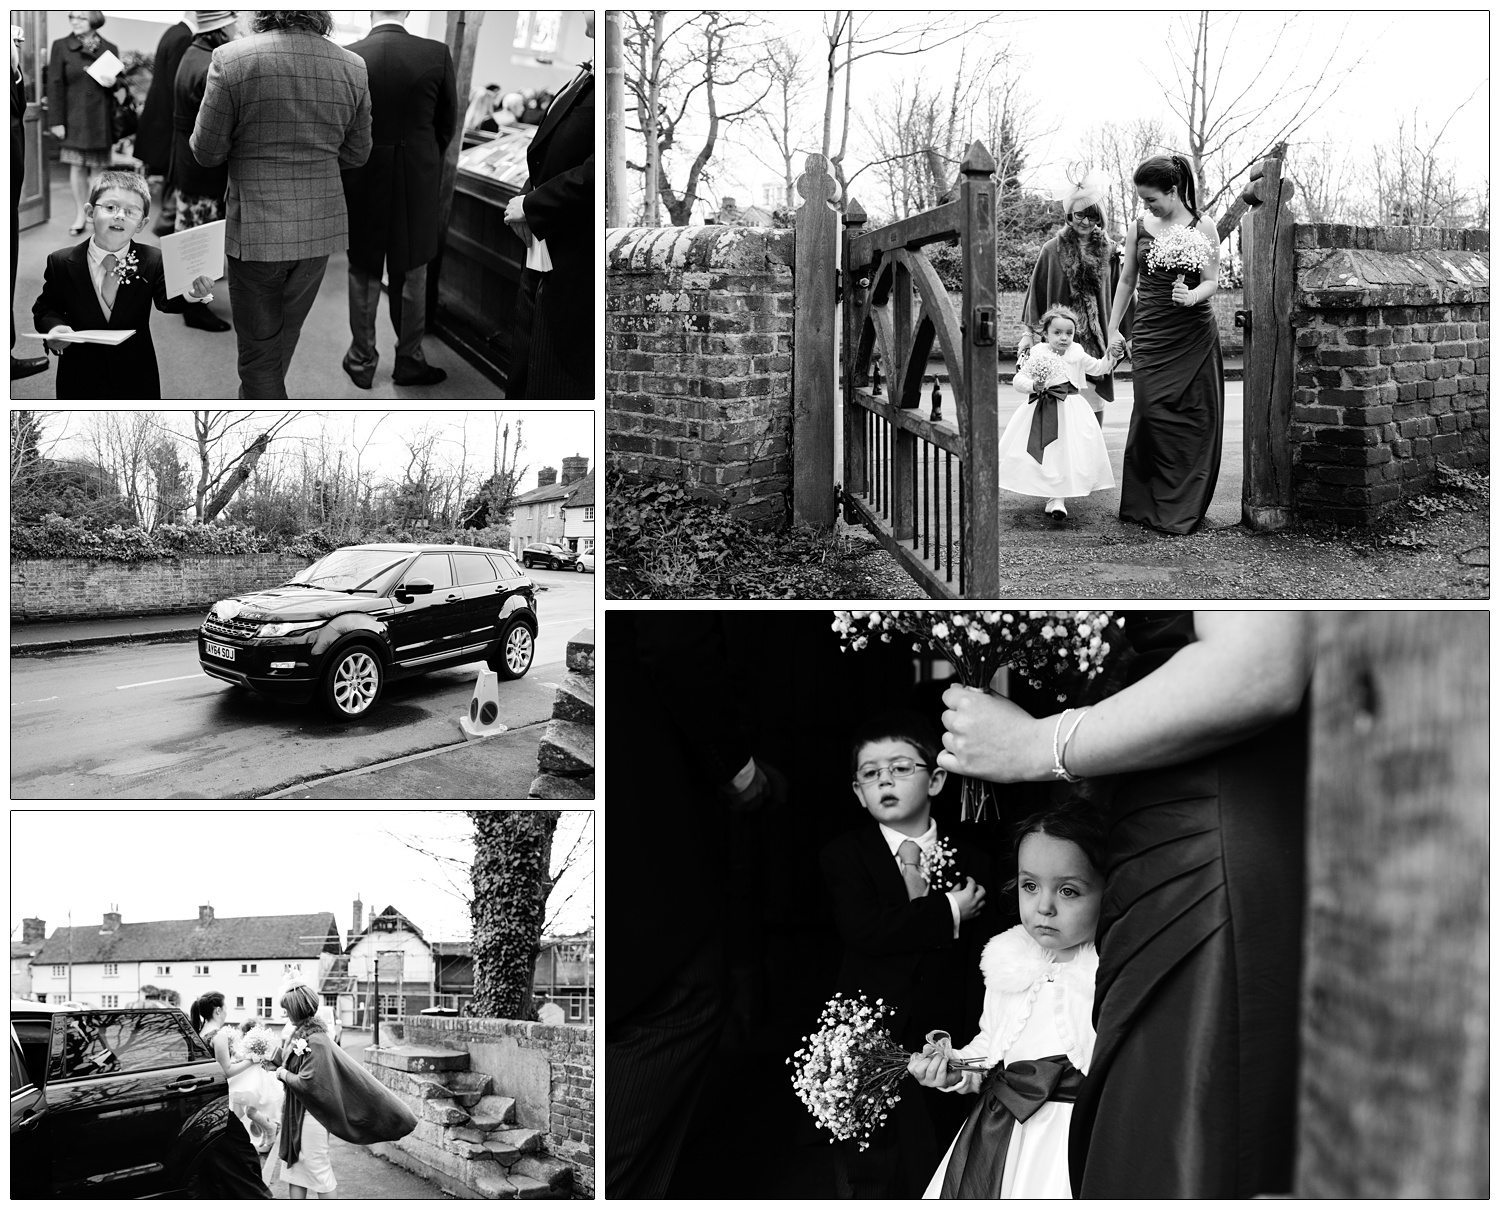 Reportage style wedding photography capturing people arriving at the St Thomas' Church in Bradwell-on-Sea.